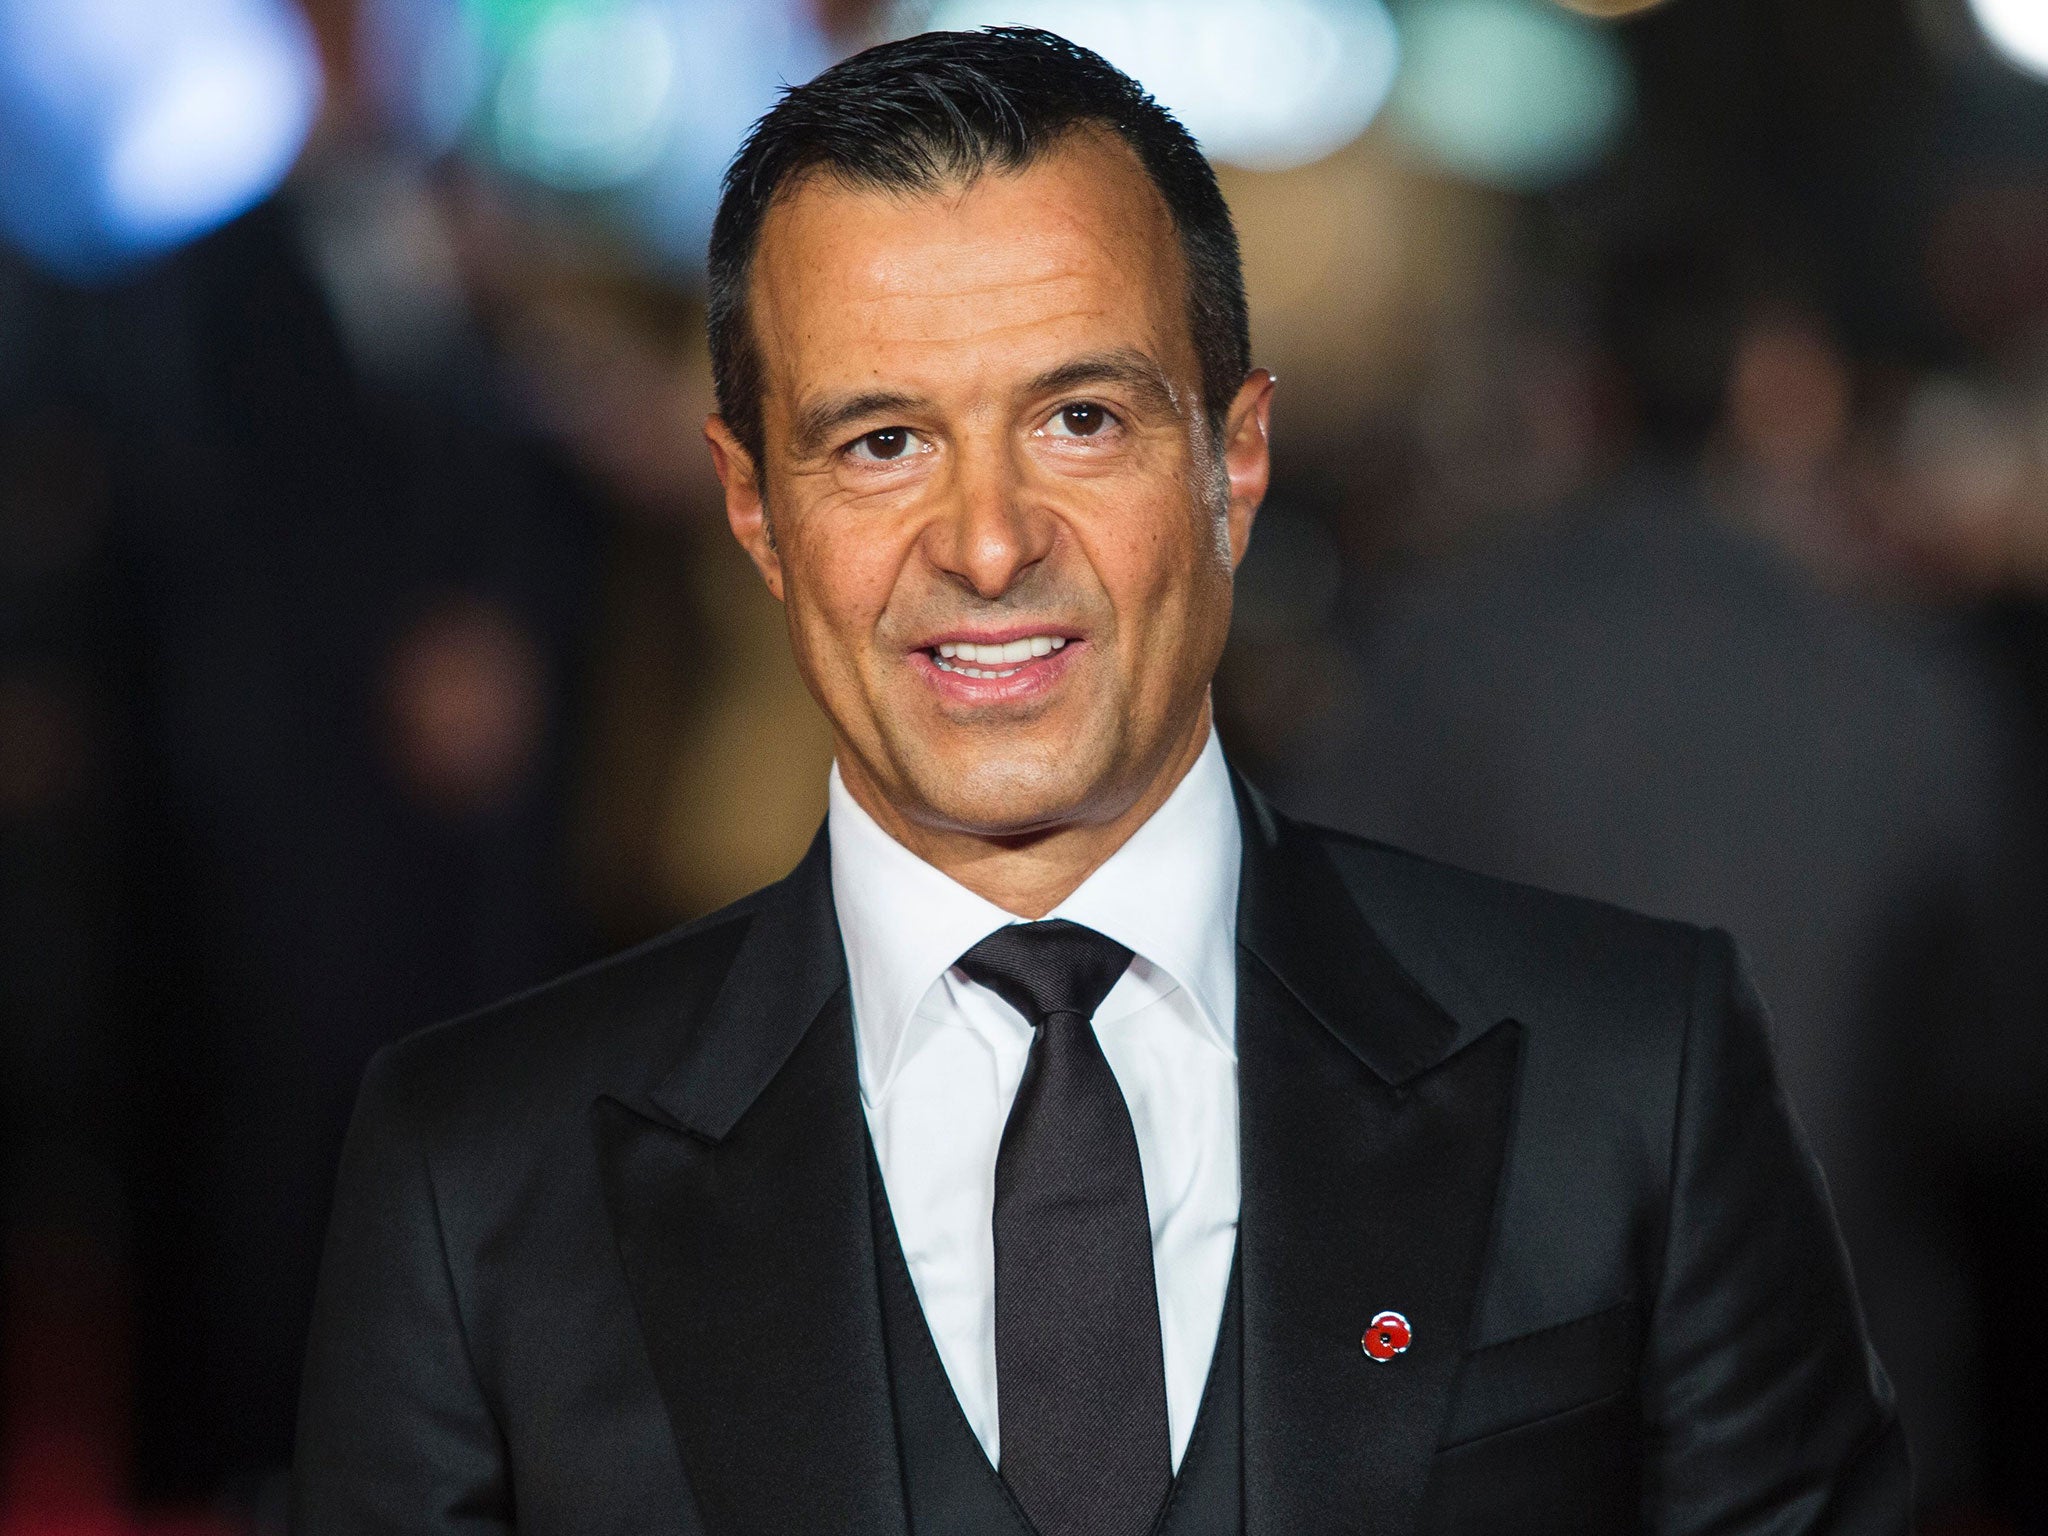 EFL to look at concerns raised over Wolves&apos; links with agent Jorge Mendes